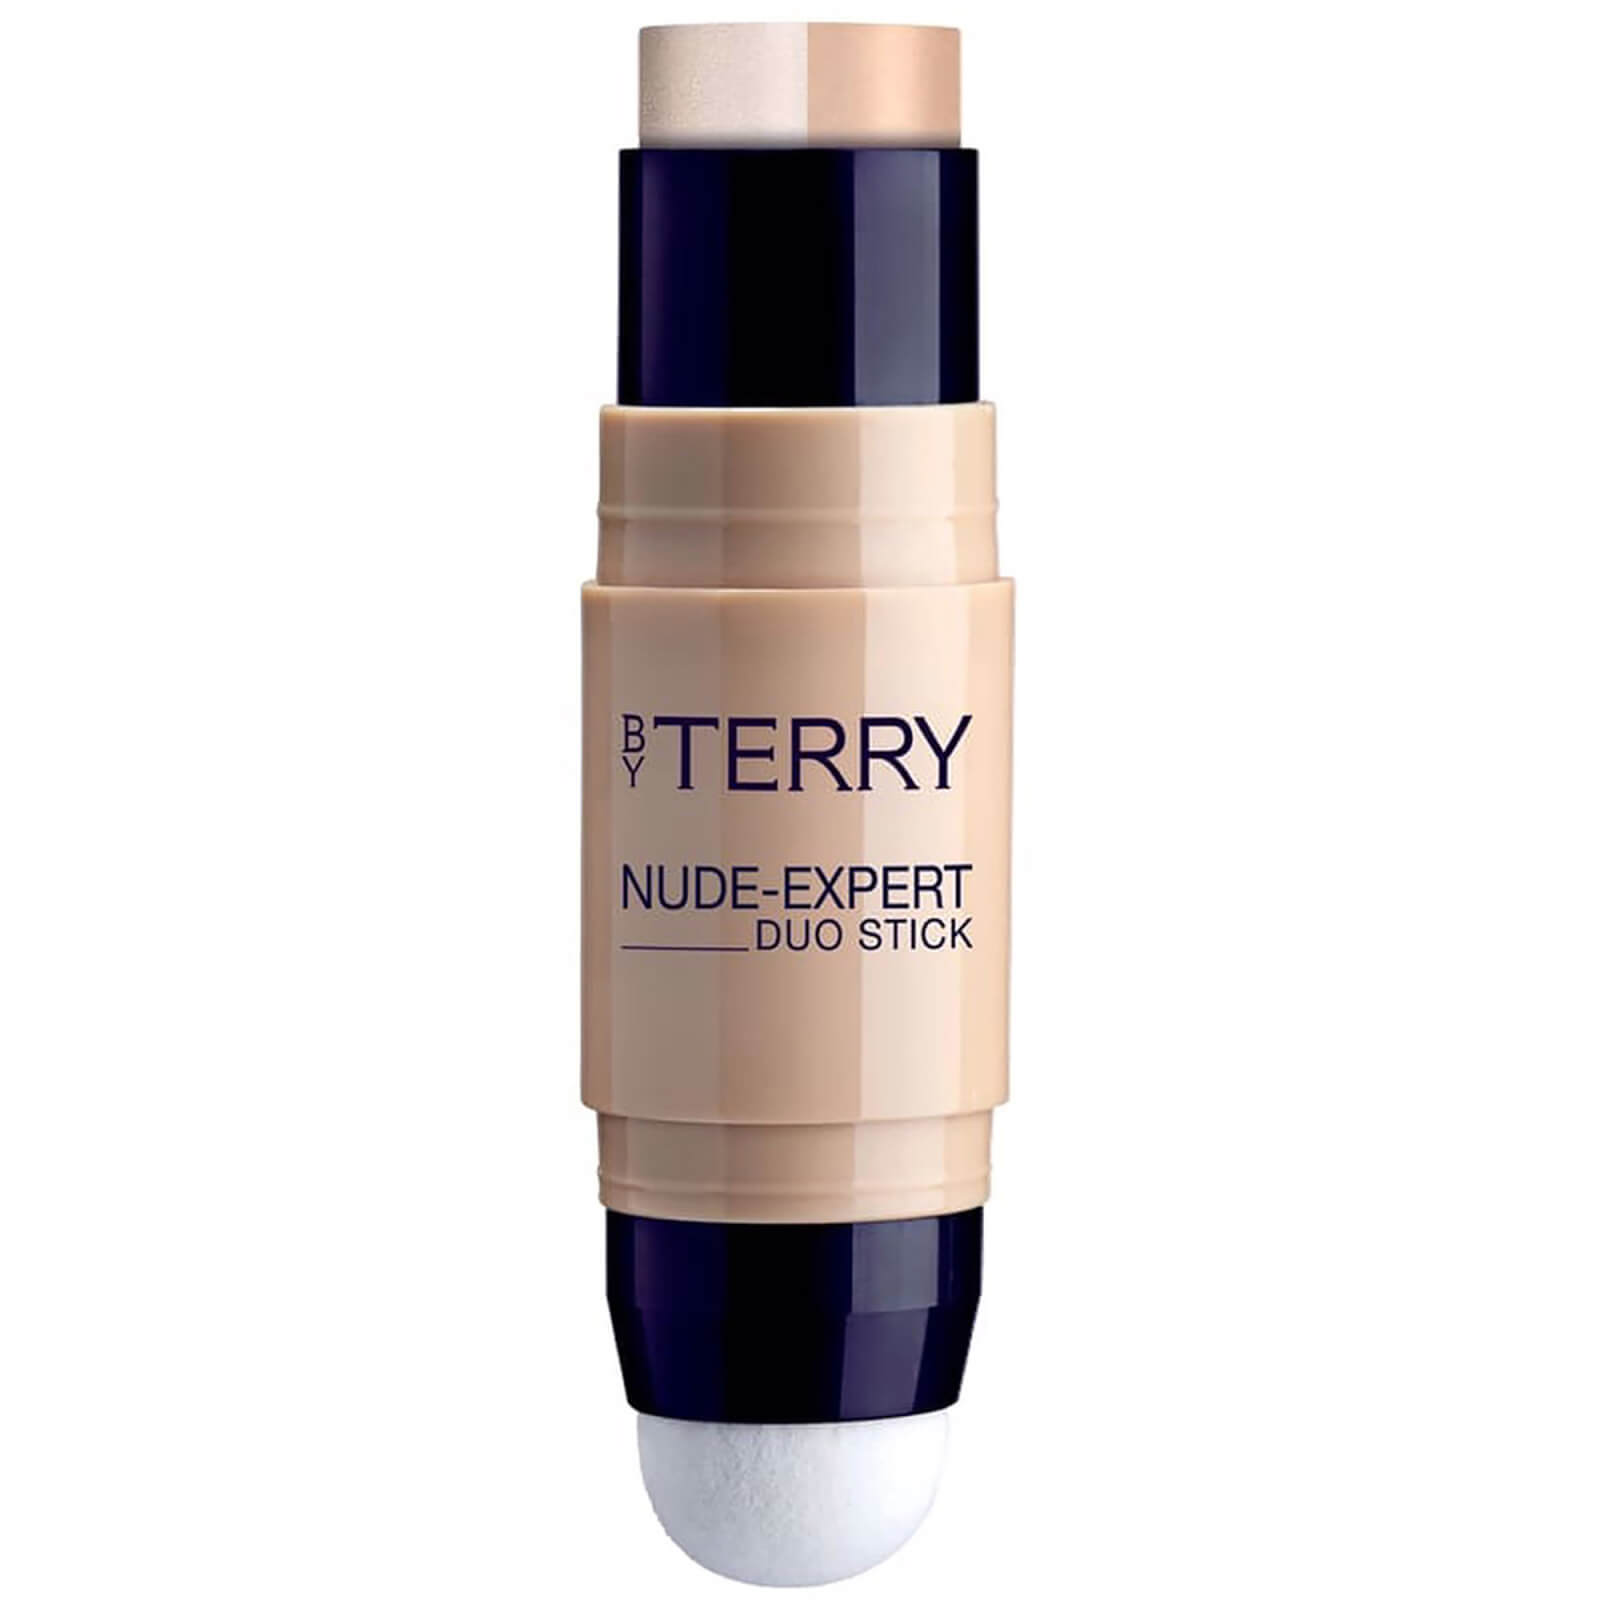 By Terry Nude-Expert Foundation (Various Shades) - 3. Cream Beige